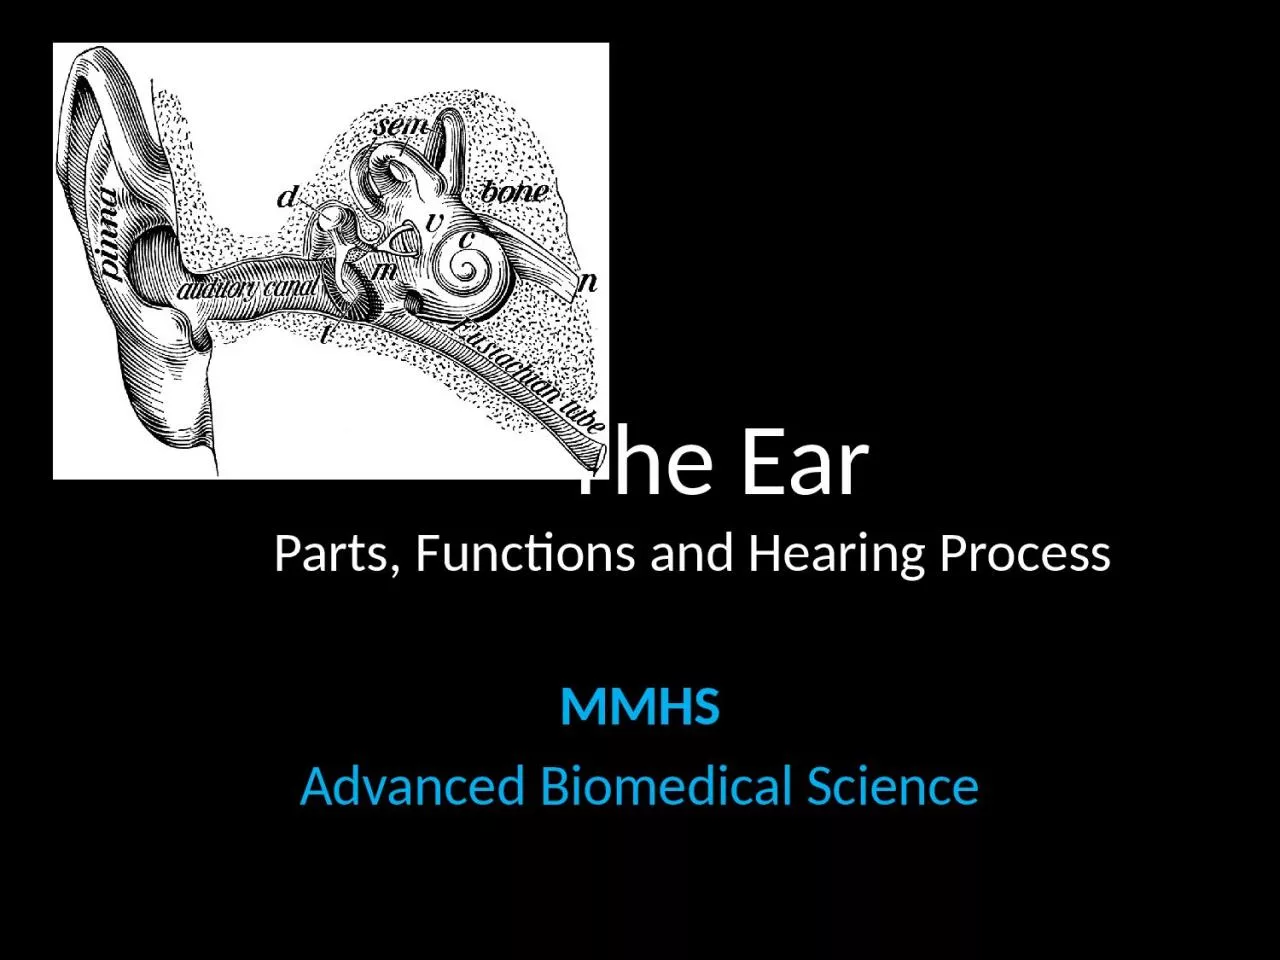 The Ear Parts, Functions and Hearing Process